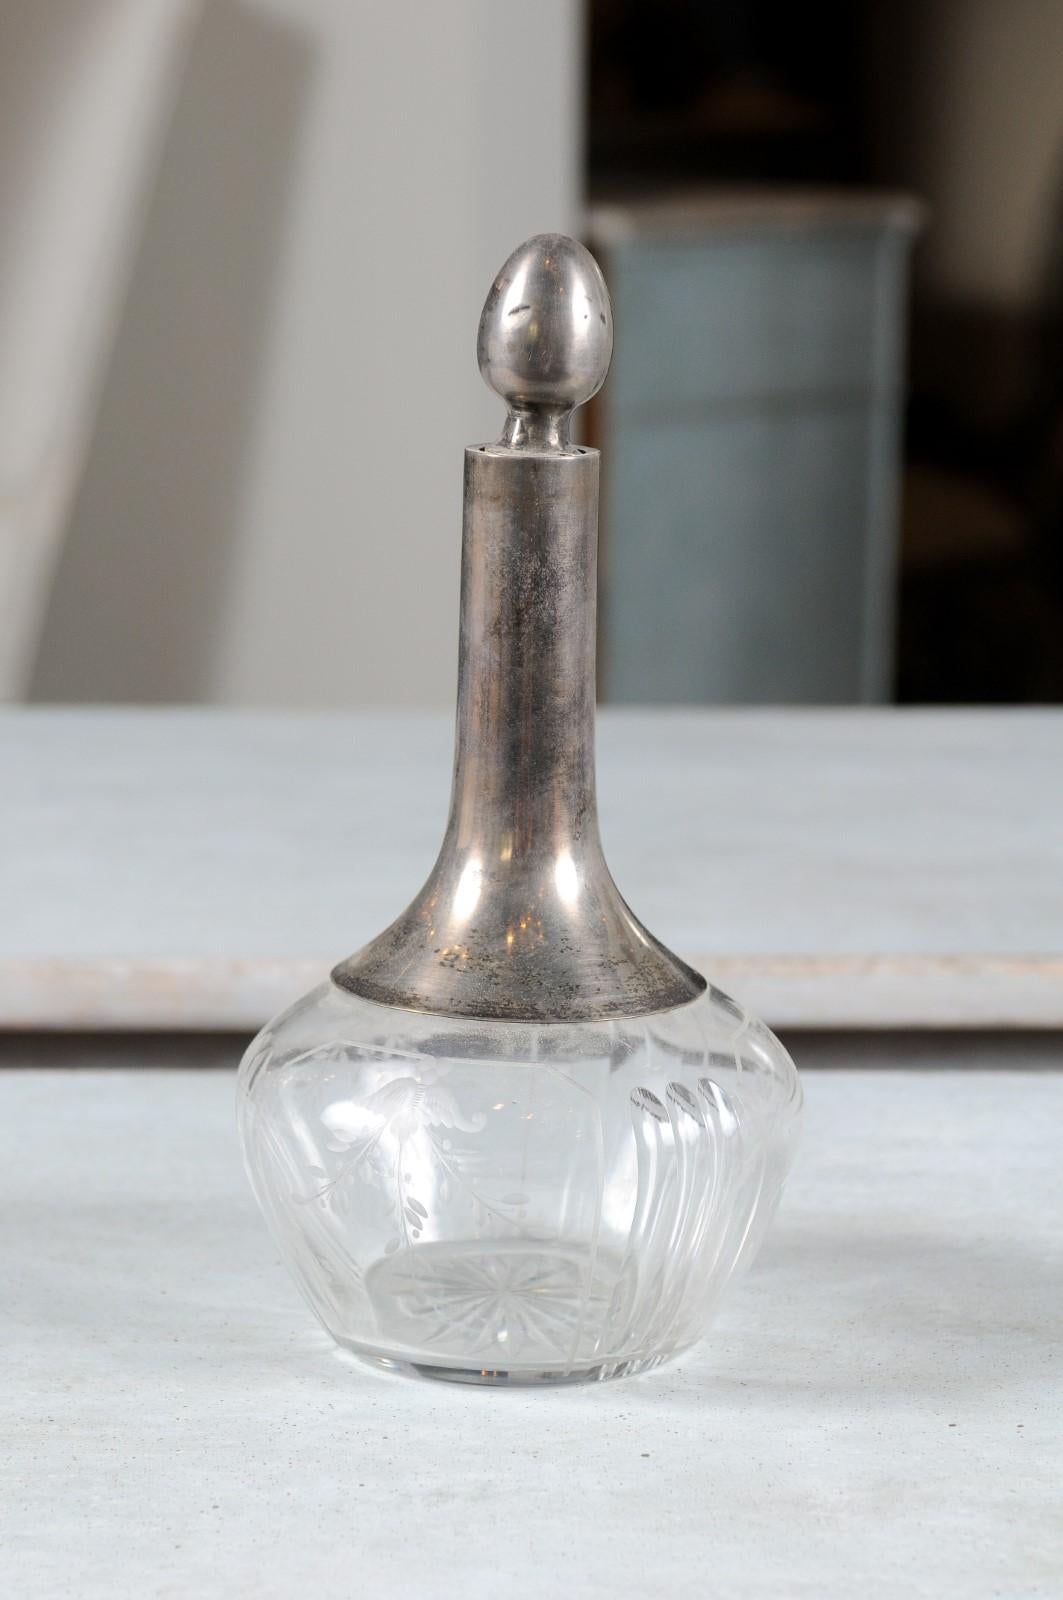 A Danish crystal and silver decanter from the 20th century, with acorn-shaped stopper and engraved foliage motifs. Born in Denmark during the 20th century, this decanter features a slender silver neck topped with a stopper and sitting above a